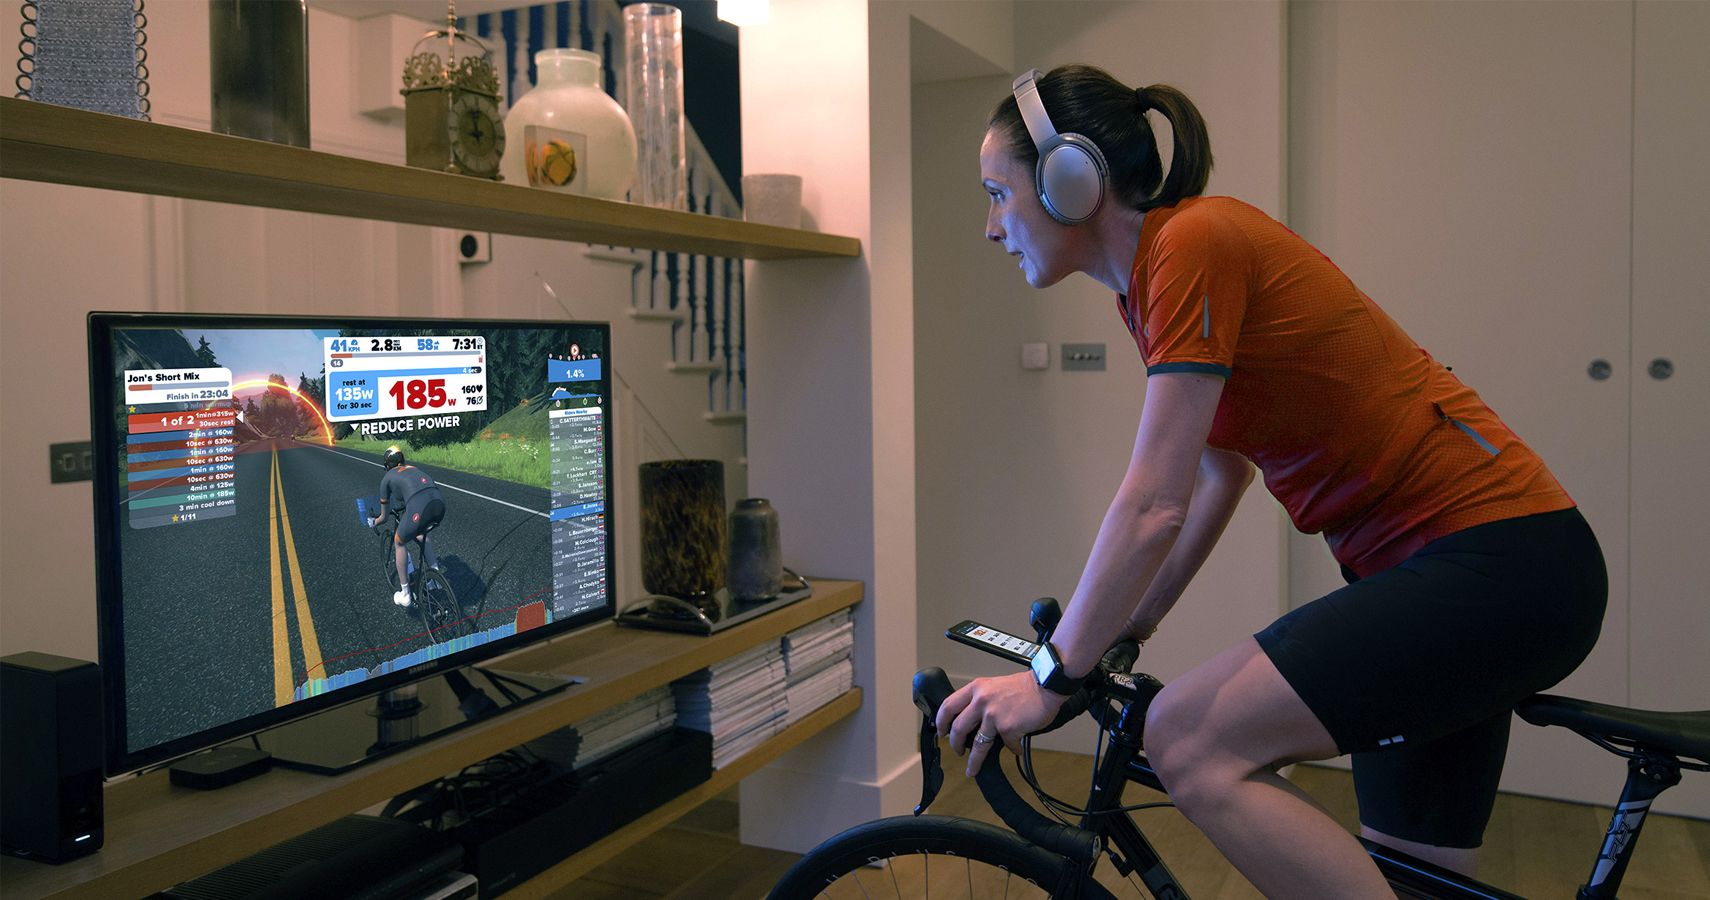 Online Multiplayer Cycling Game Zwift Might Be The Next Biggest Esports Title